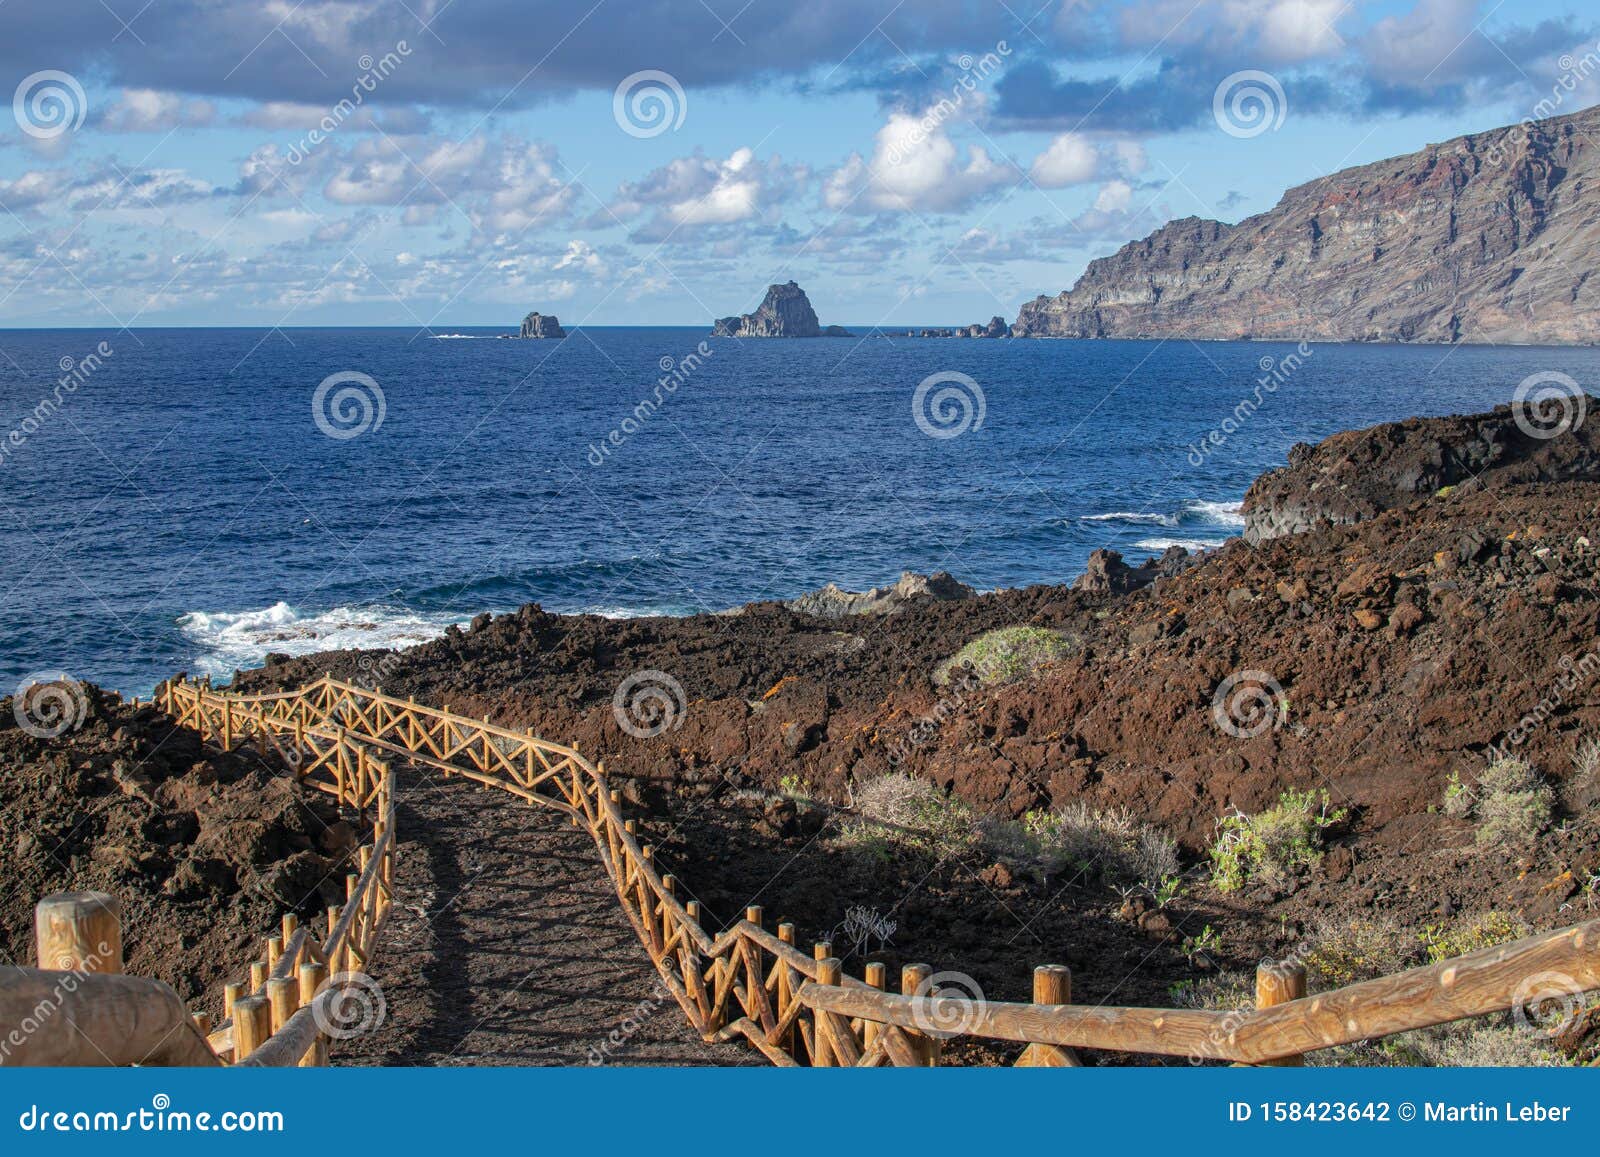 volcanic pathway with wooden railing, with roques de salmor background